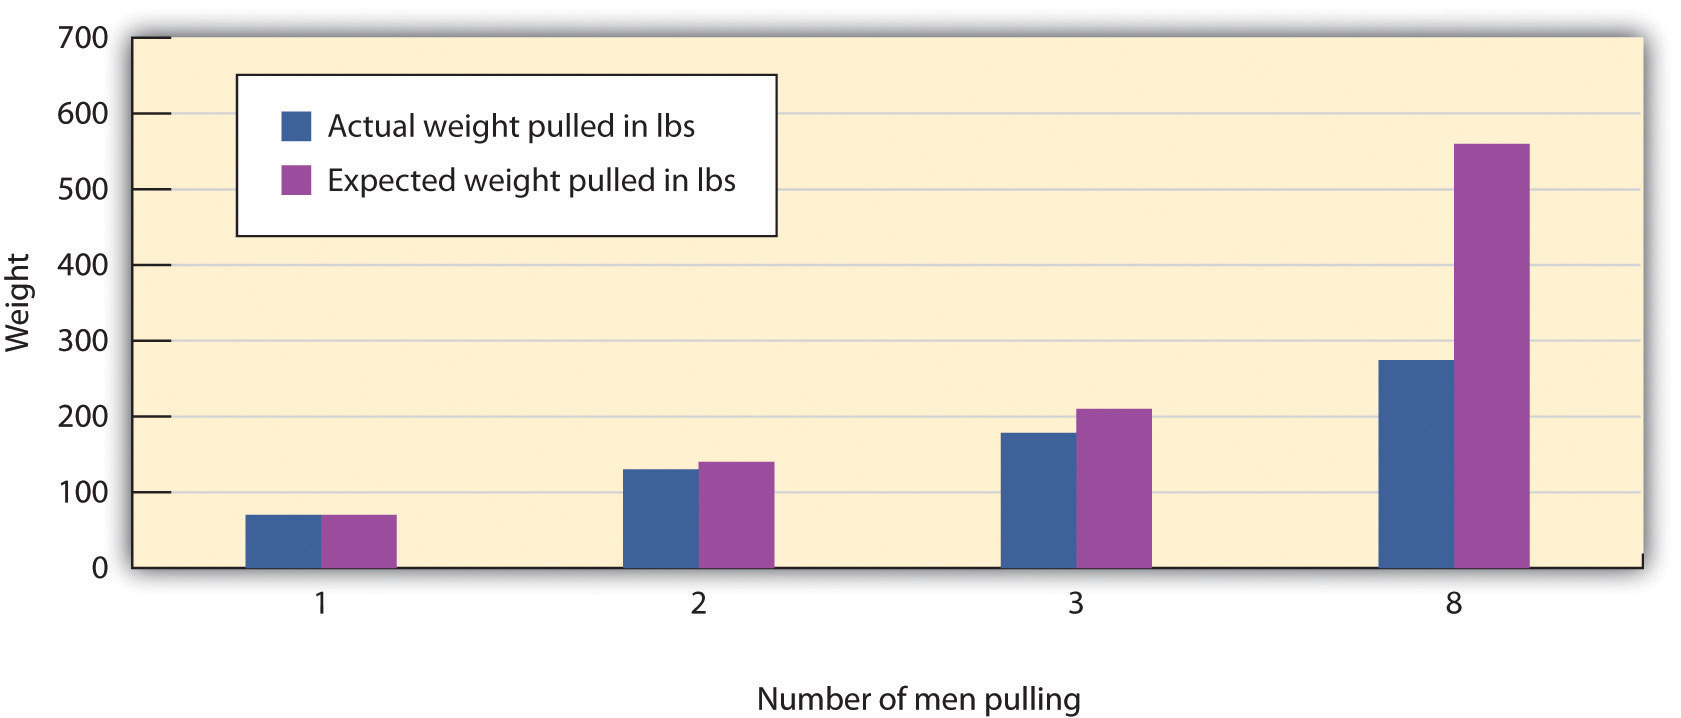 This graph contrasts weight by number of men pulling to illustrate group process loss. long description available.